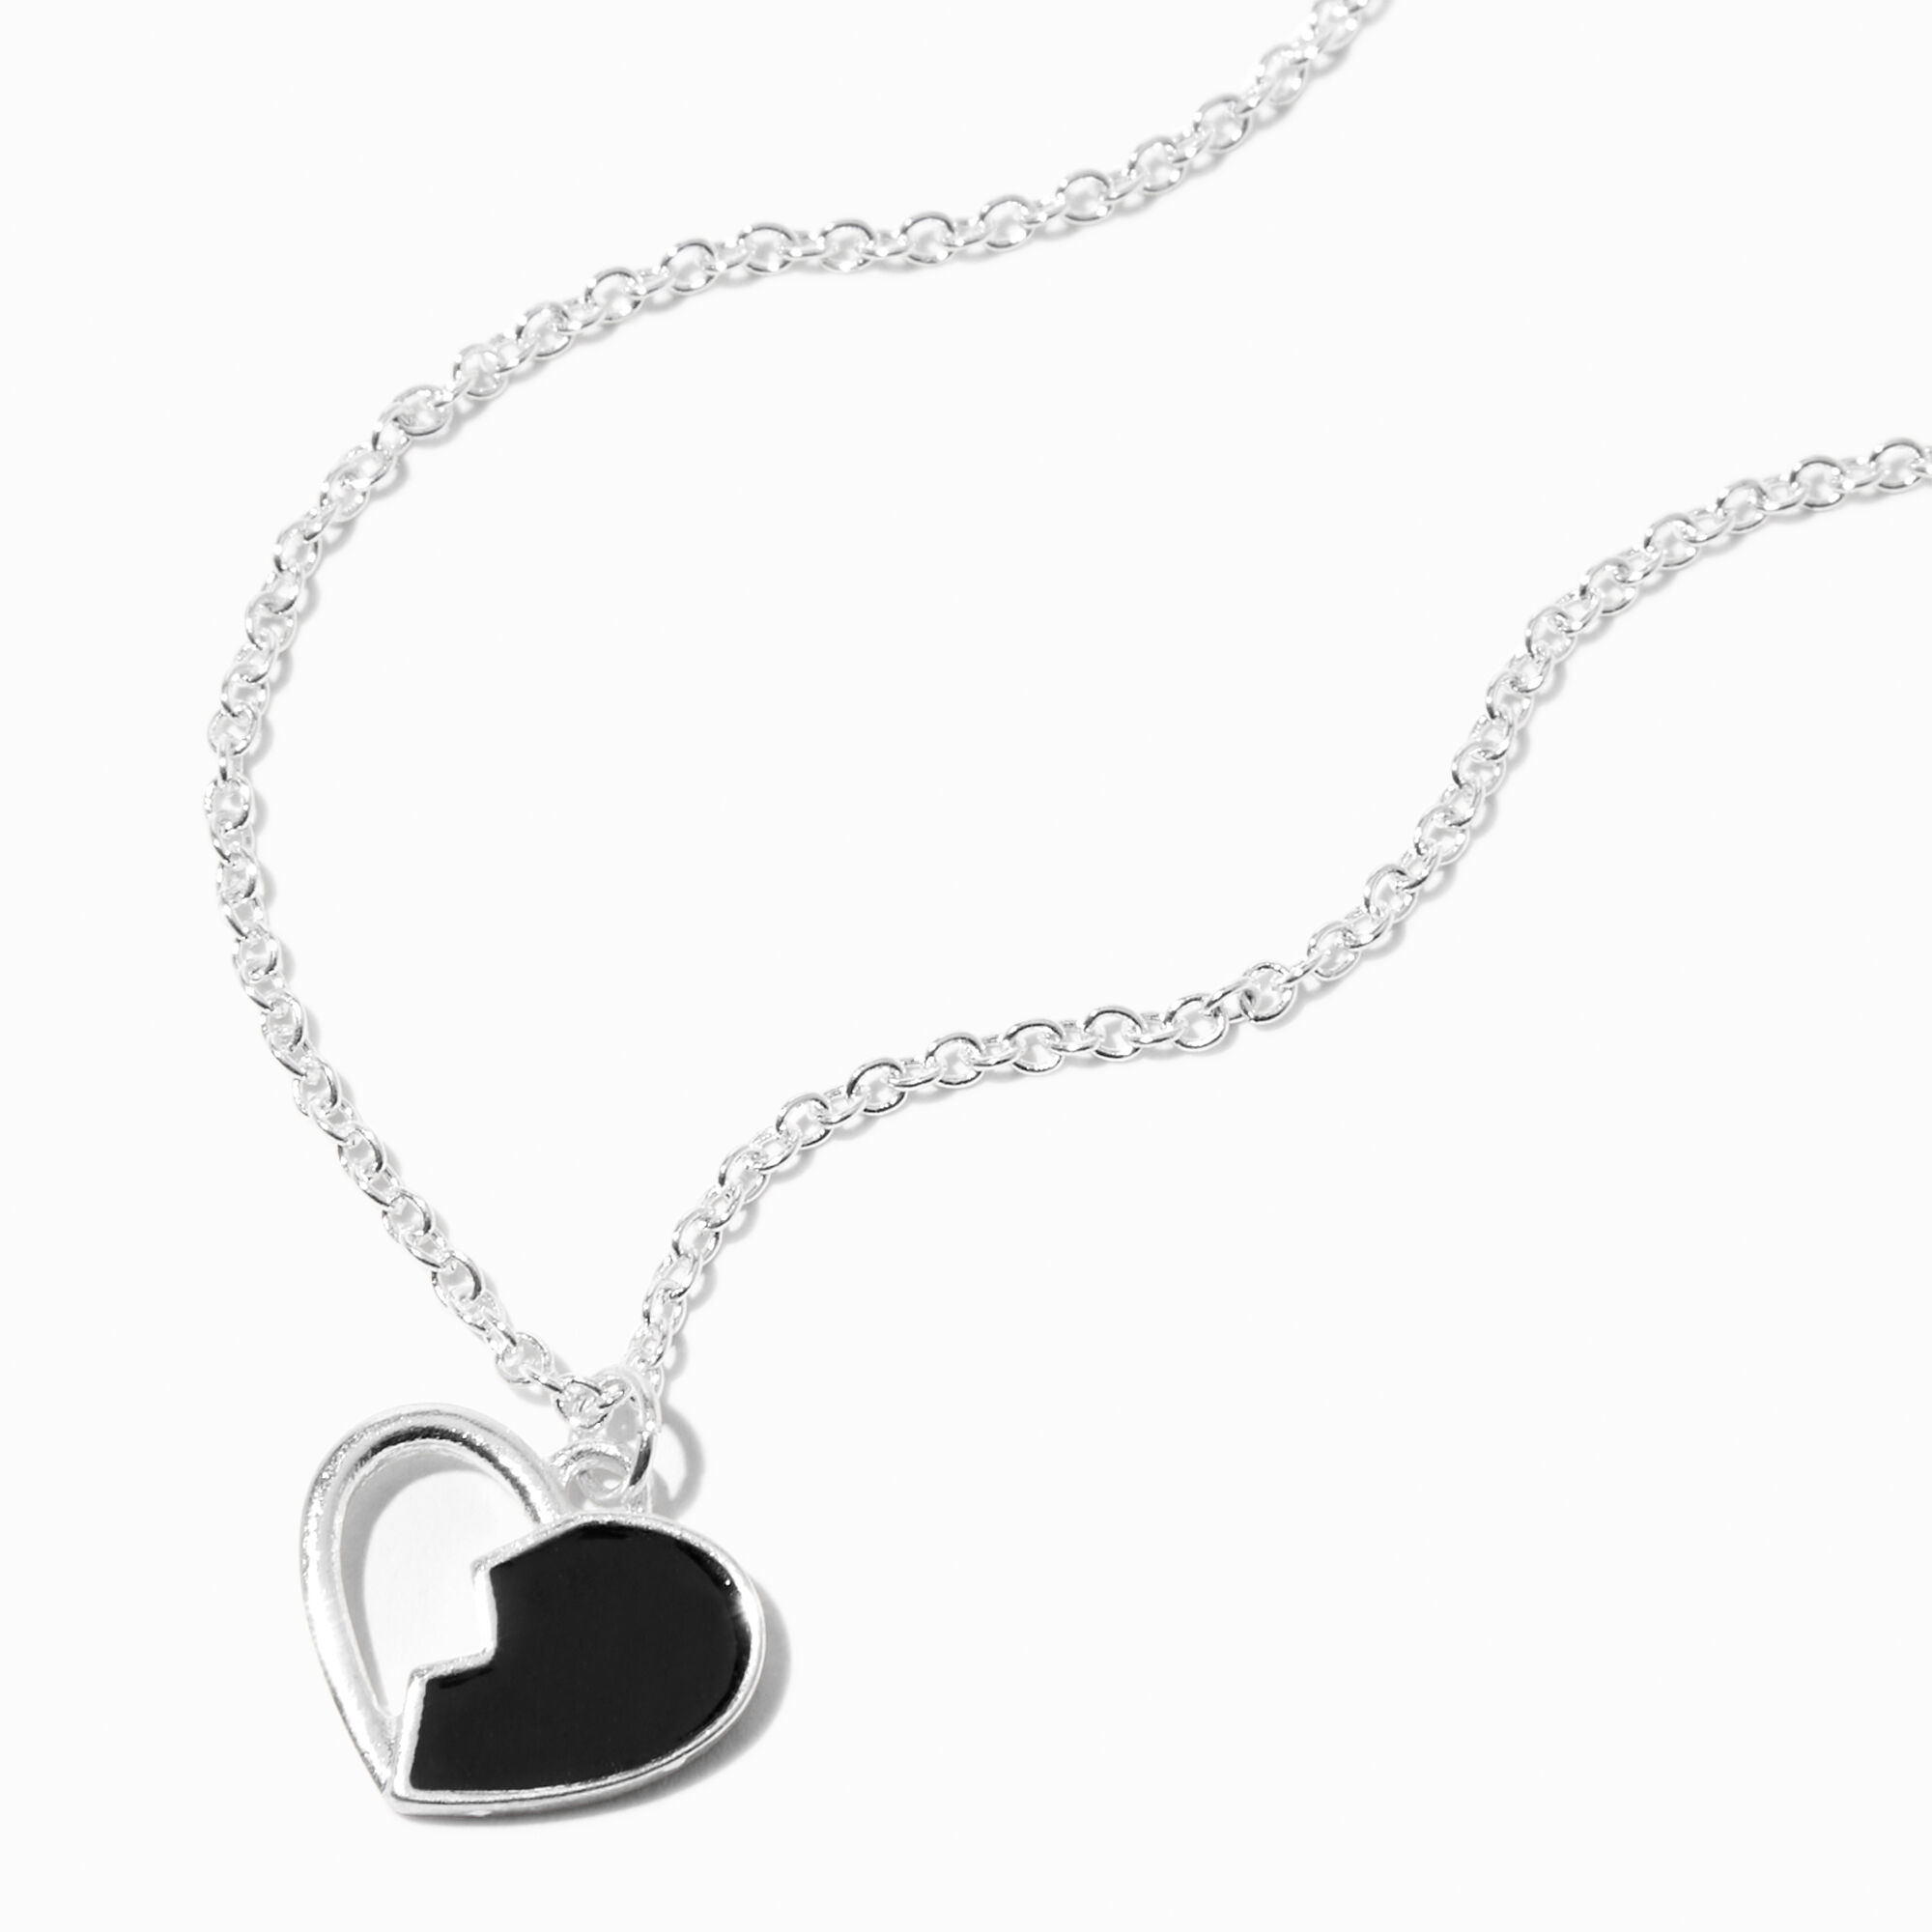 View Claires Broken Heart Necklace Earrings Set 2 Pack Black information